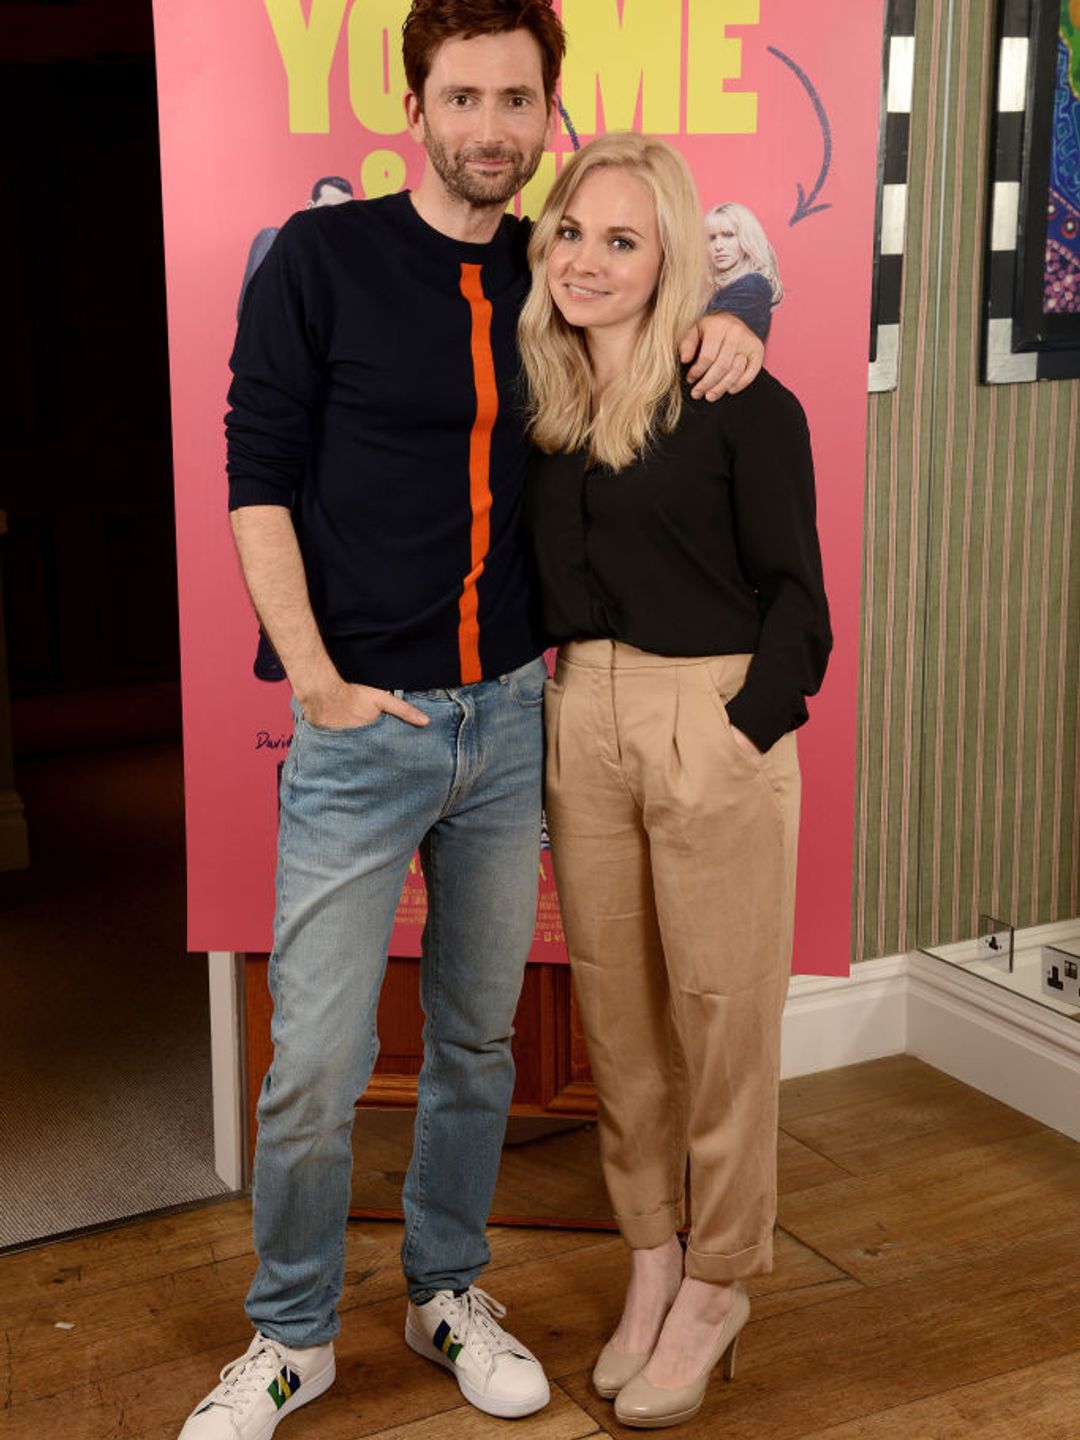 David and Georgia Tennant attend a special screening of "You, Me And Him" 